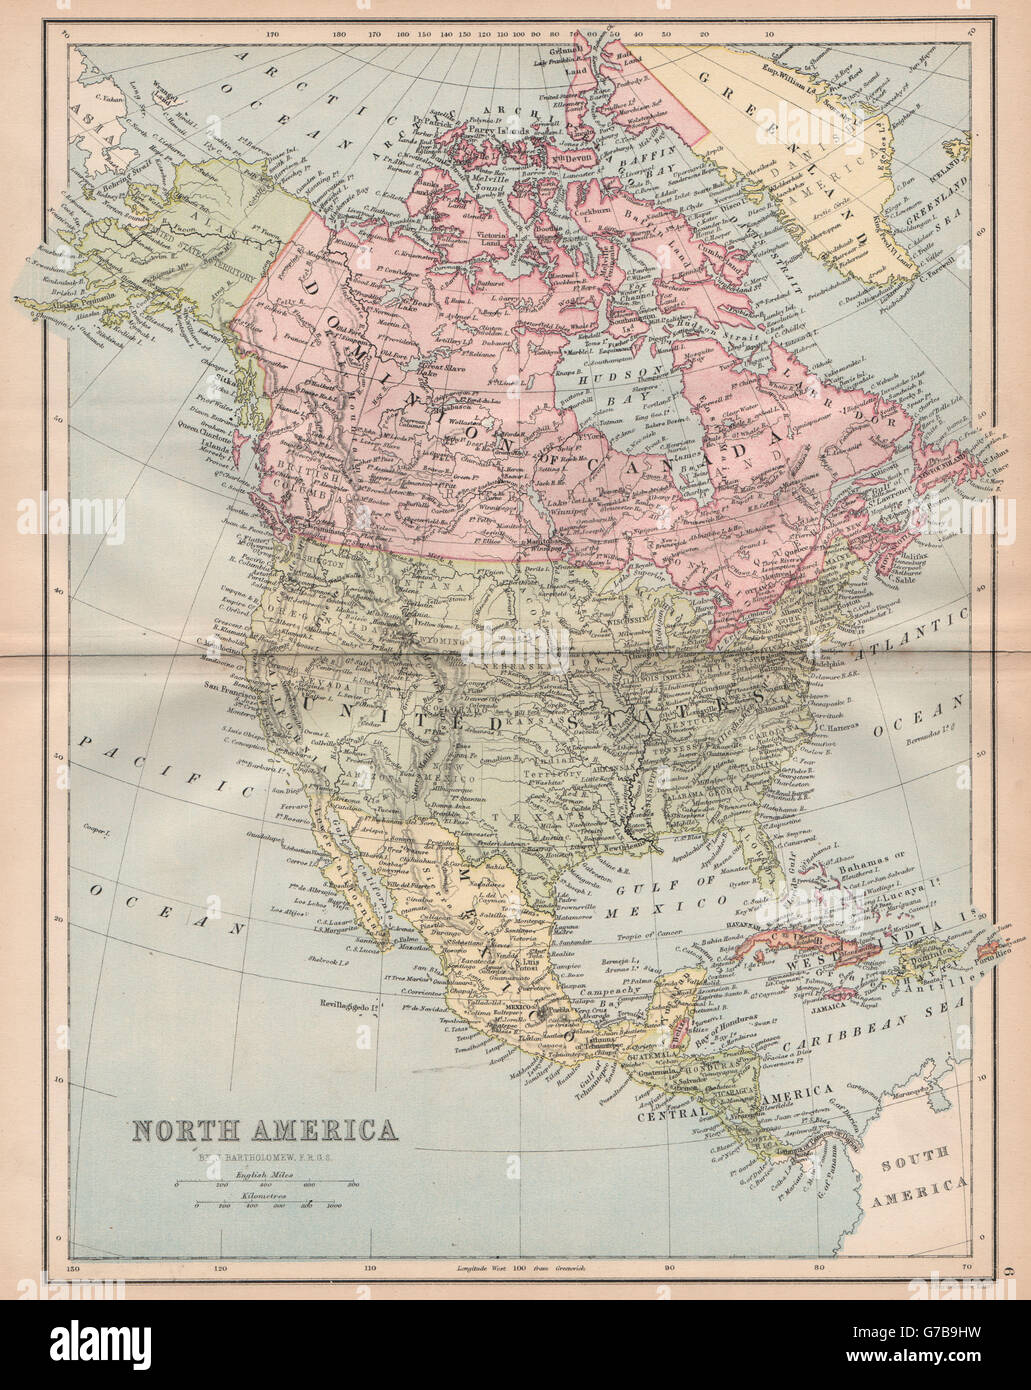 NORTH AMERICA. Shows part of Greenland as Canadian. BARTHOLOMEW, 1878 old map Stock Photo